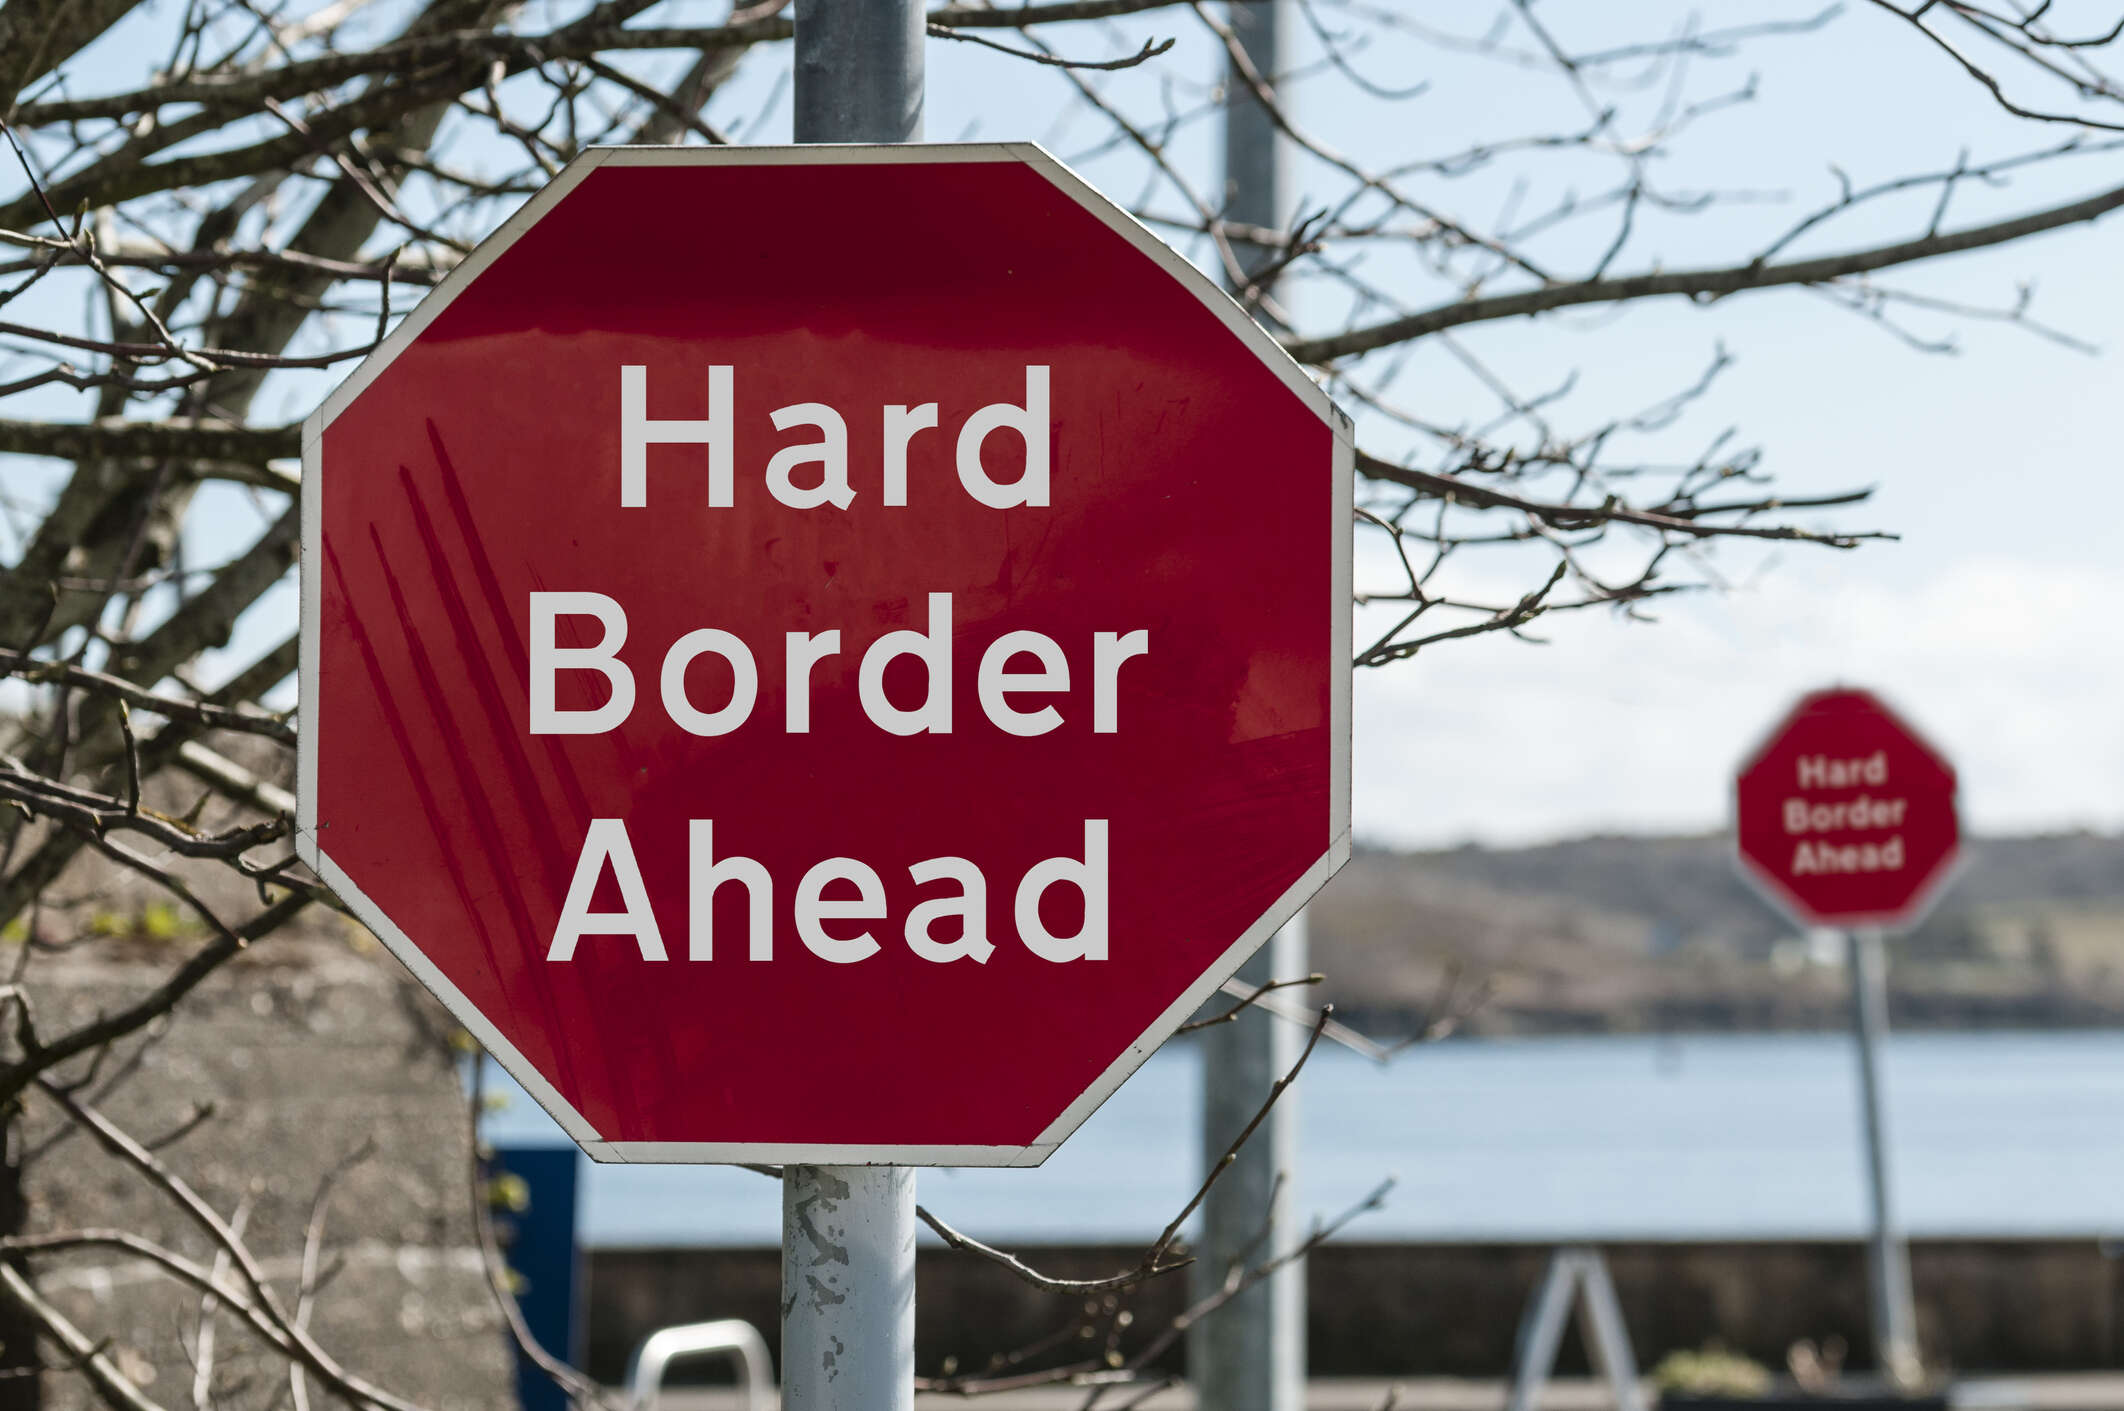 UN calls for 'urgent' co-operation on cross-border data flows